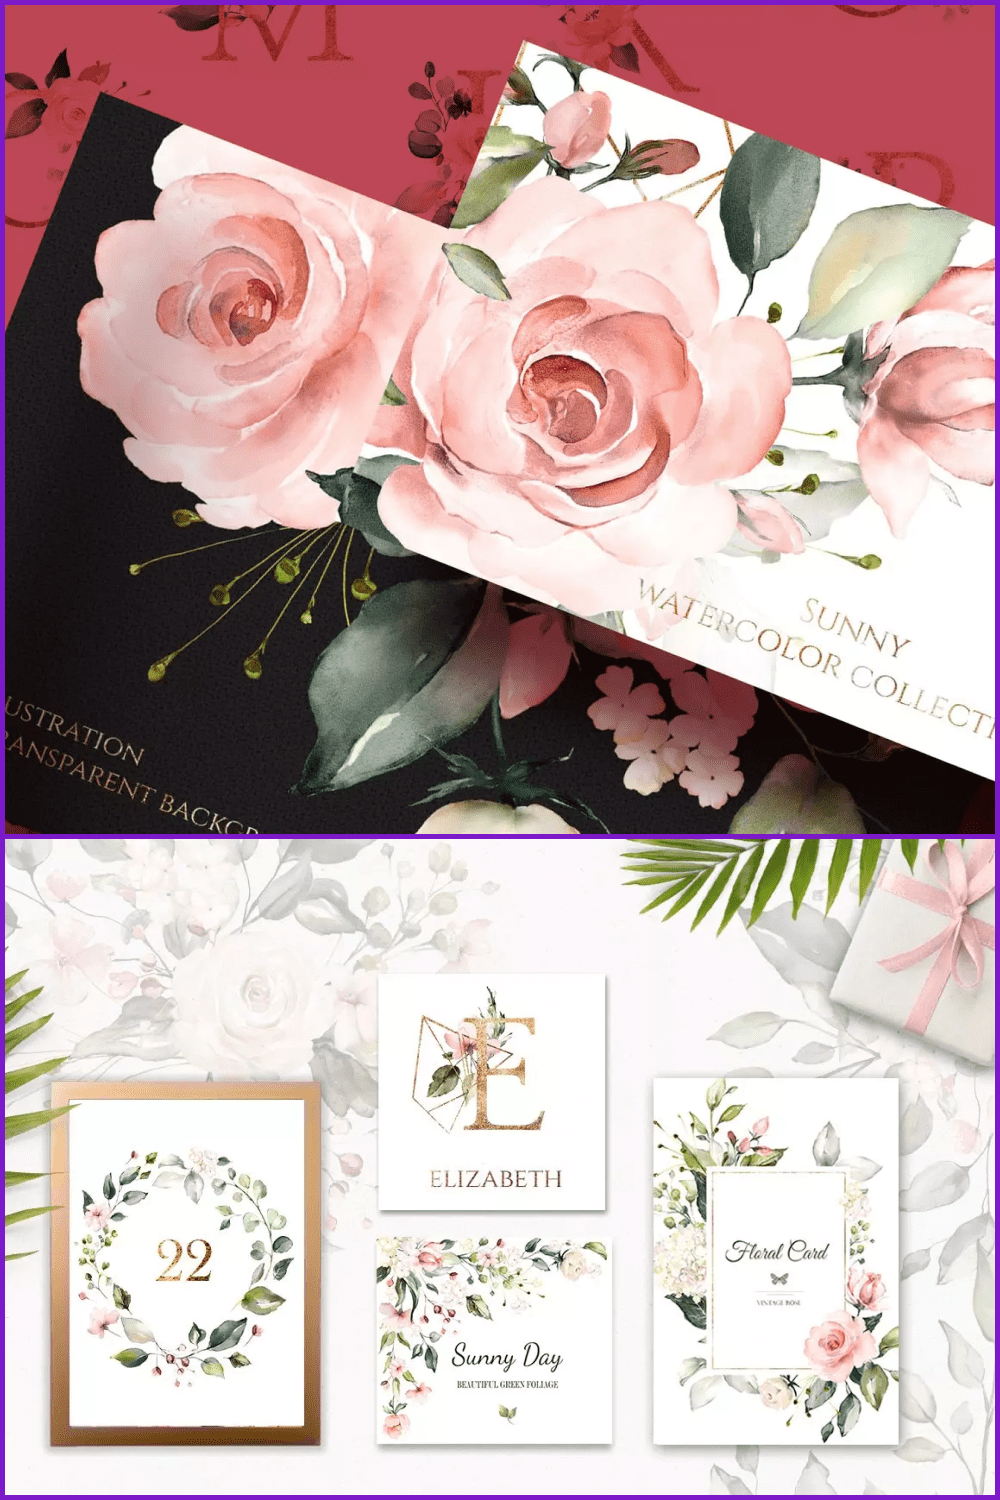 Envelops and post cards with pink roses.